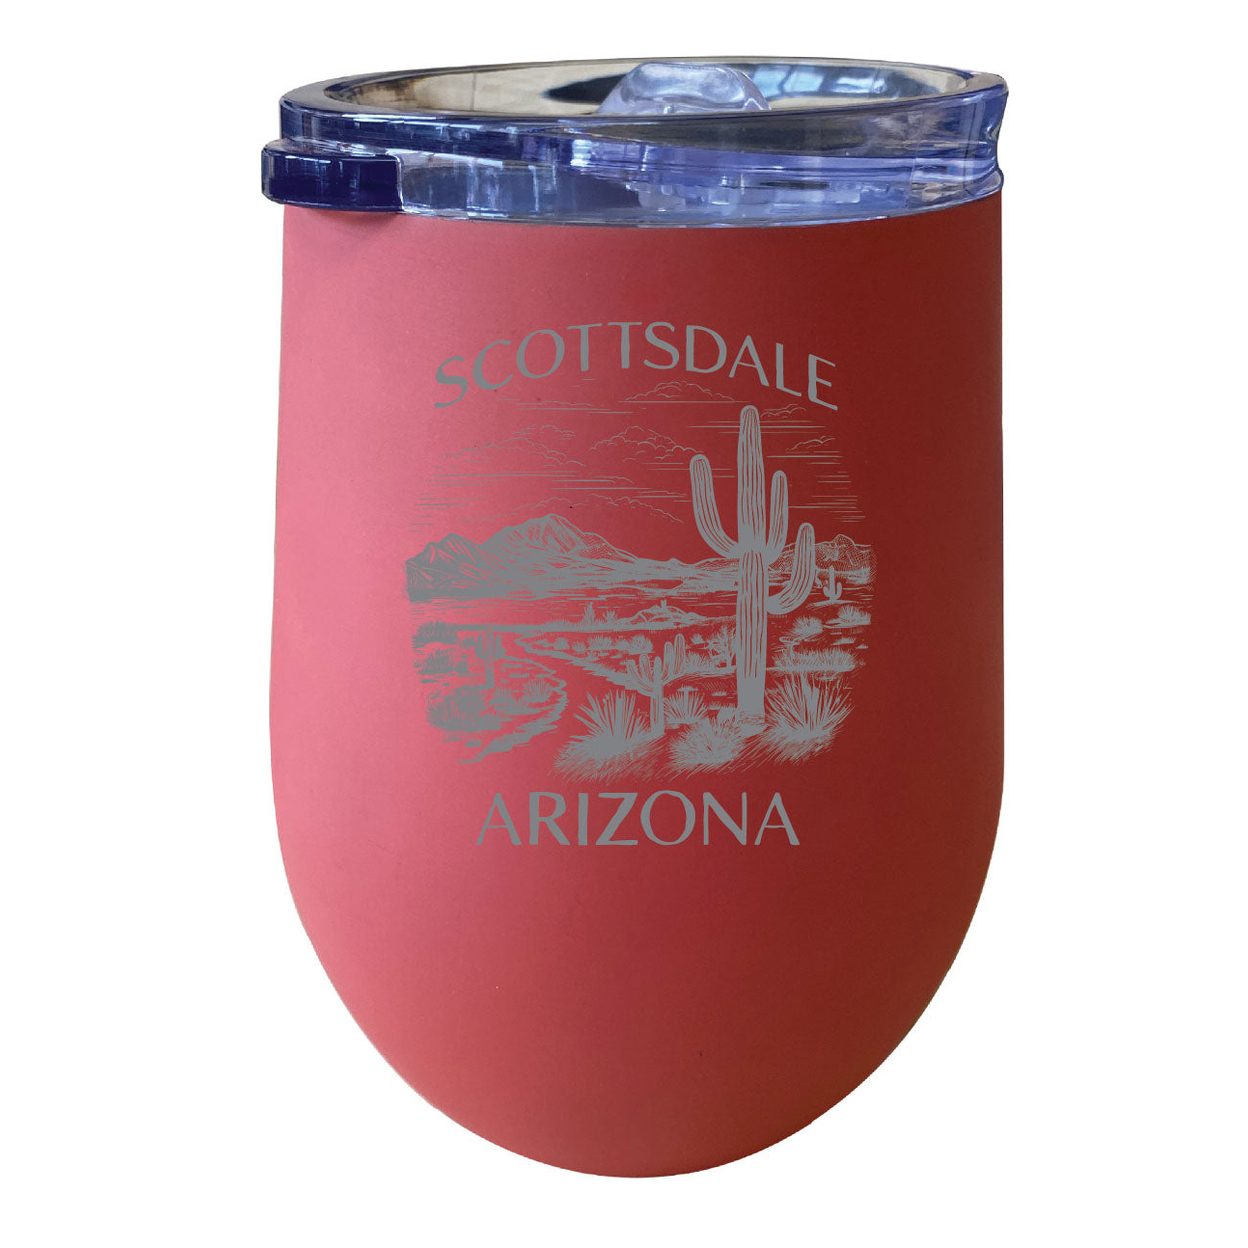 Scottsdale Arizona Souvenir 12 Oz Engraved Insulated Wine Stainless Steel Tumbler - Coral,,4-Pack